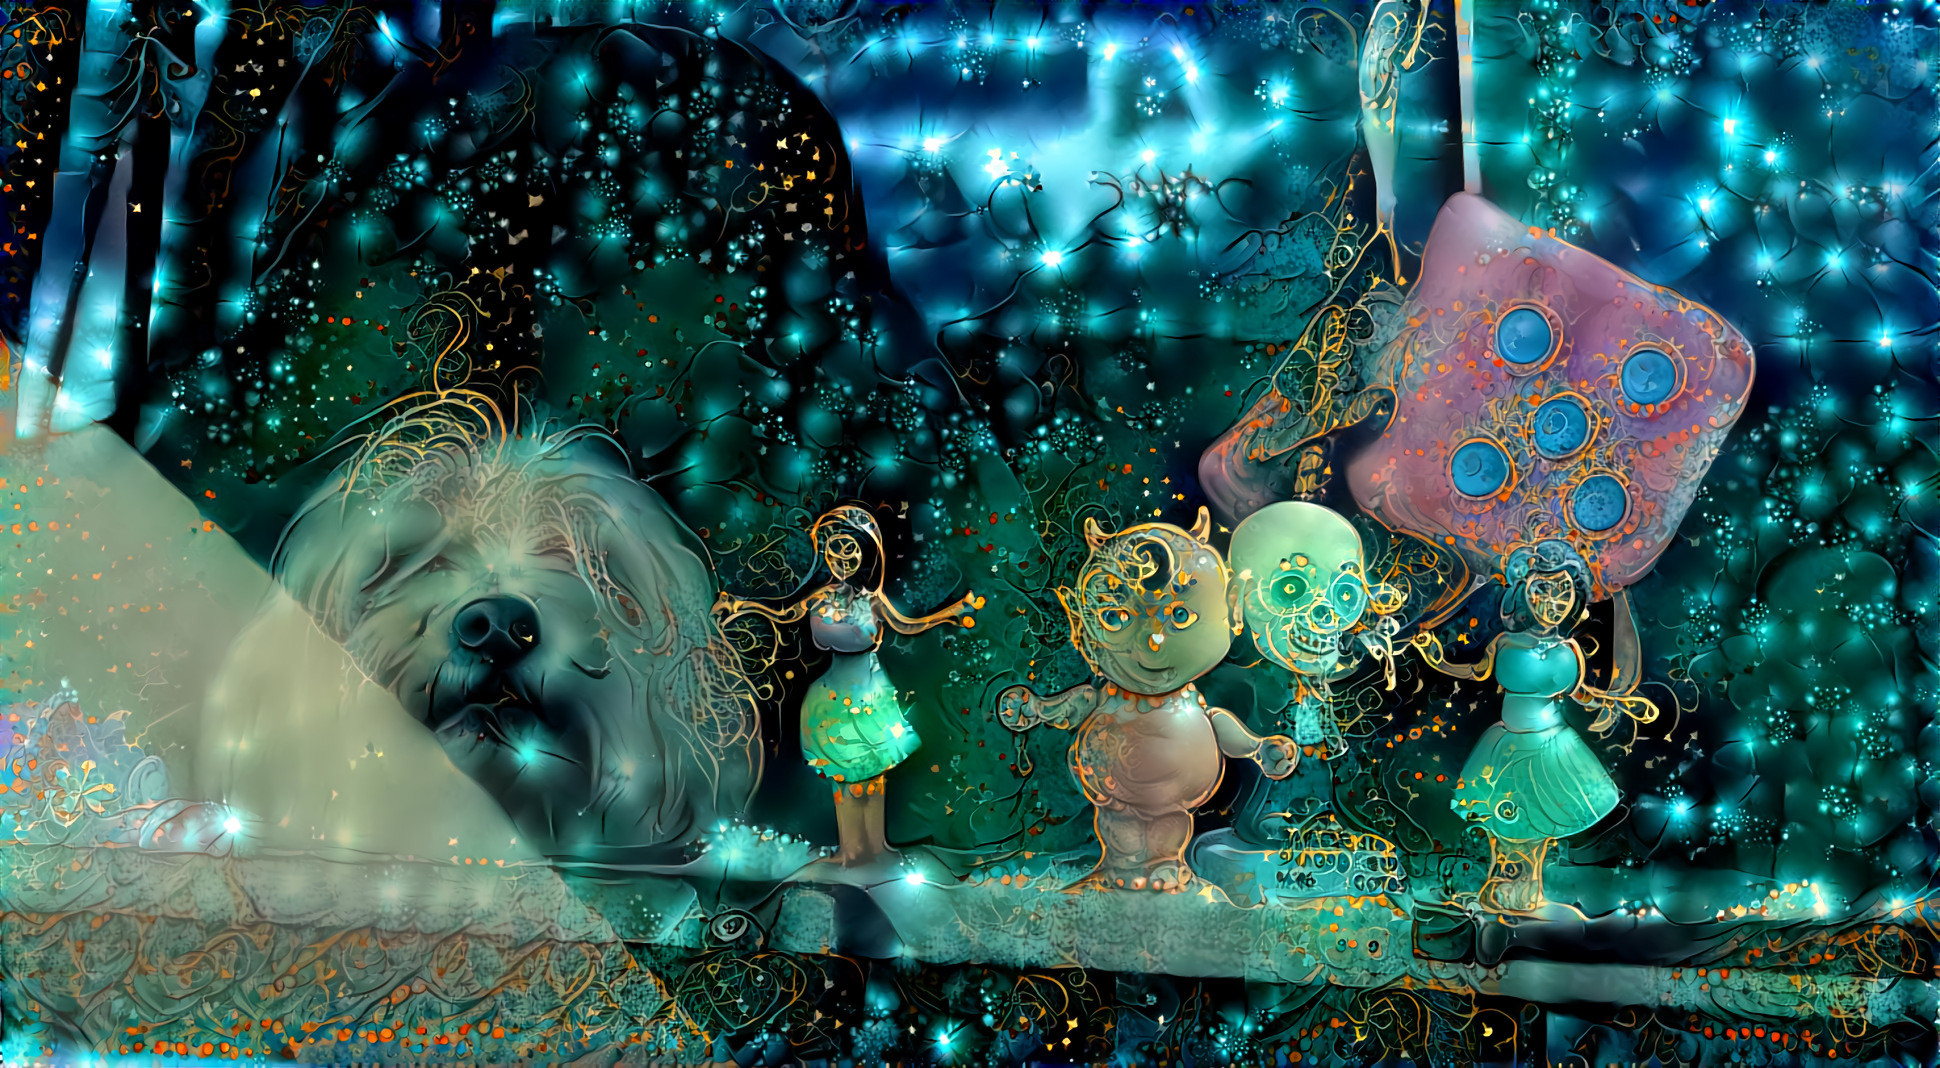 Dashboard Dog Deep Dreaming with his friends